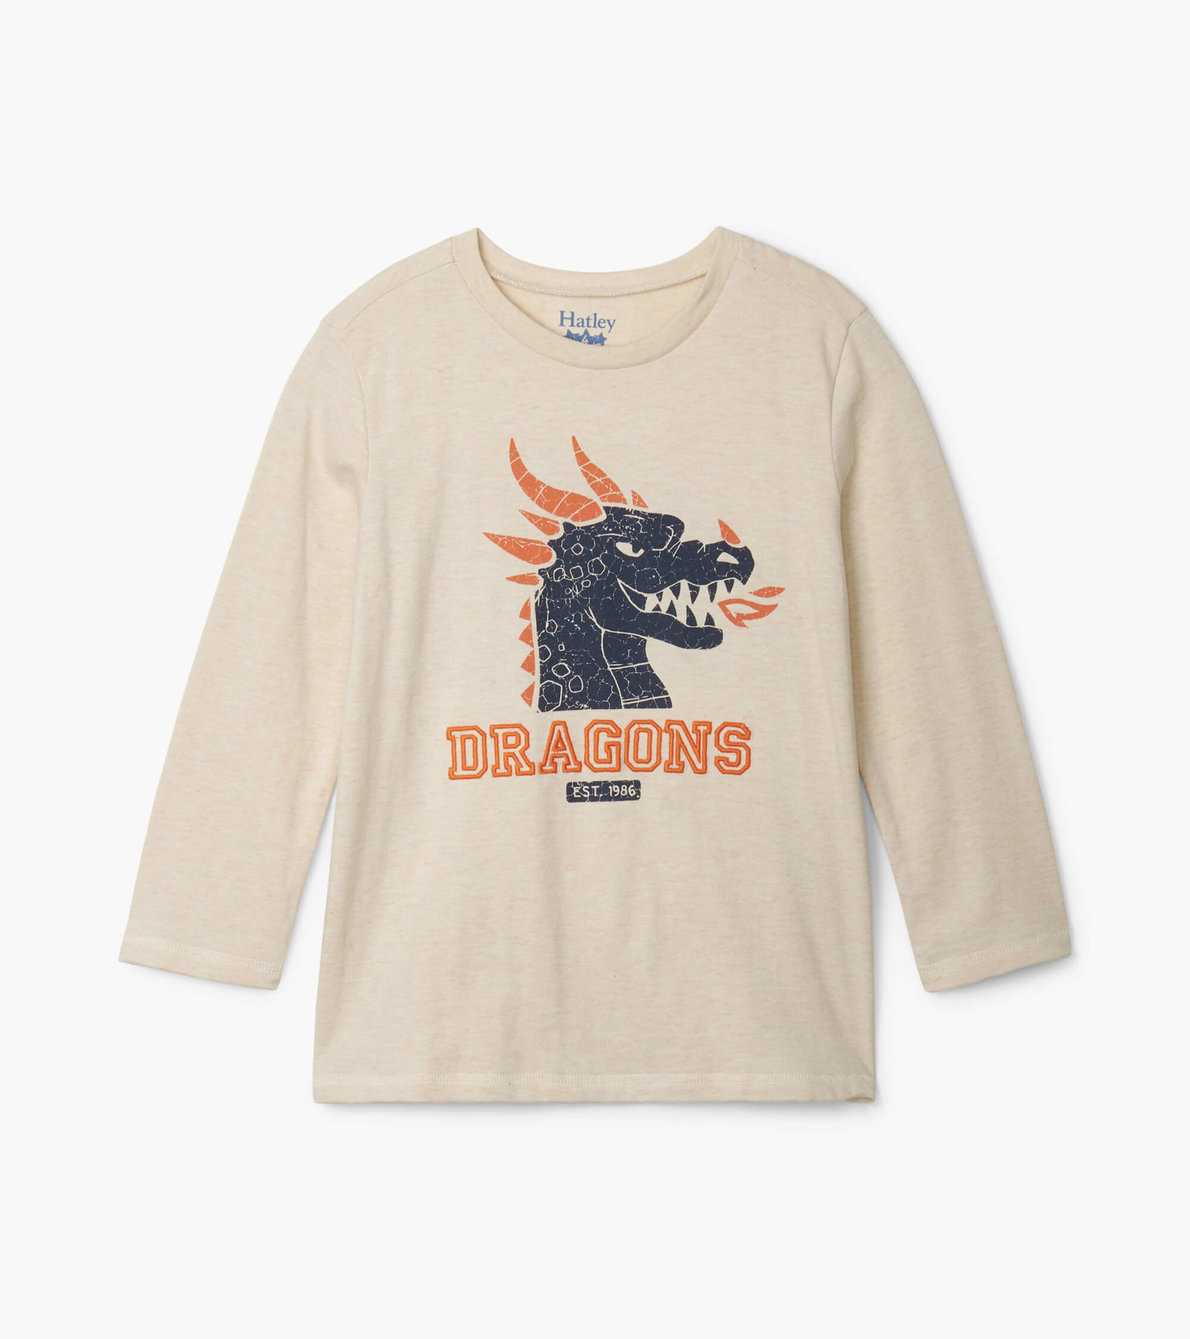 View larger image of Team Dragons Long Sleeve Tee